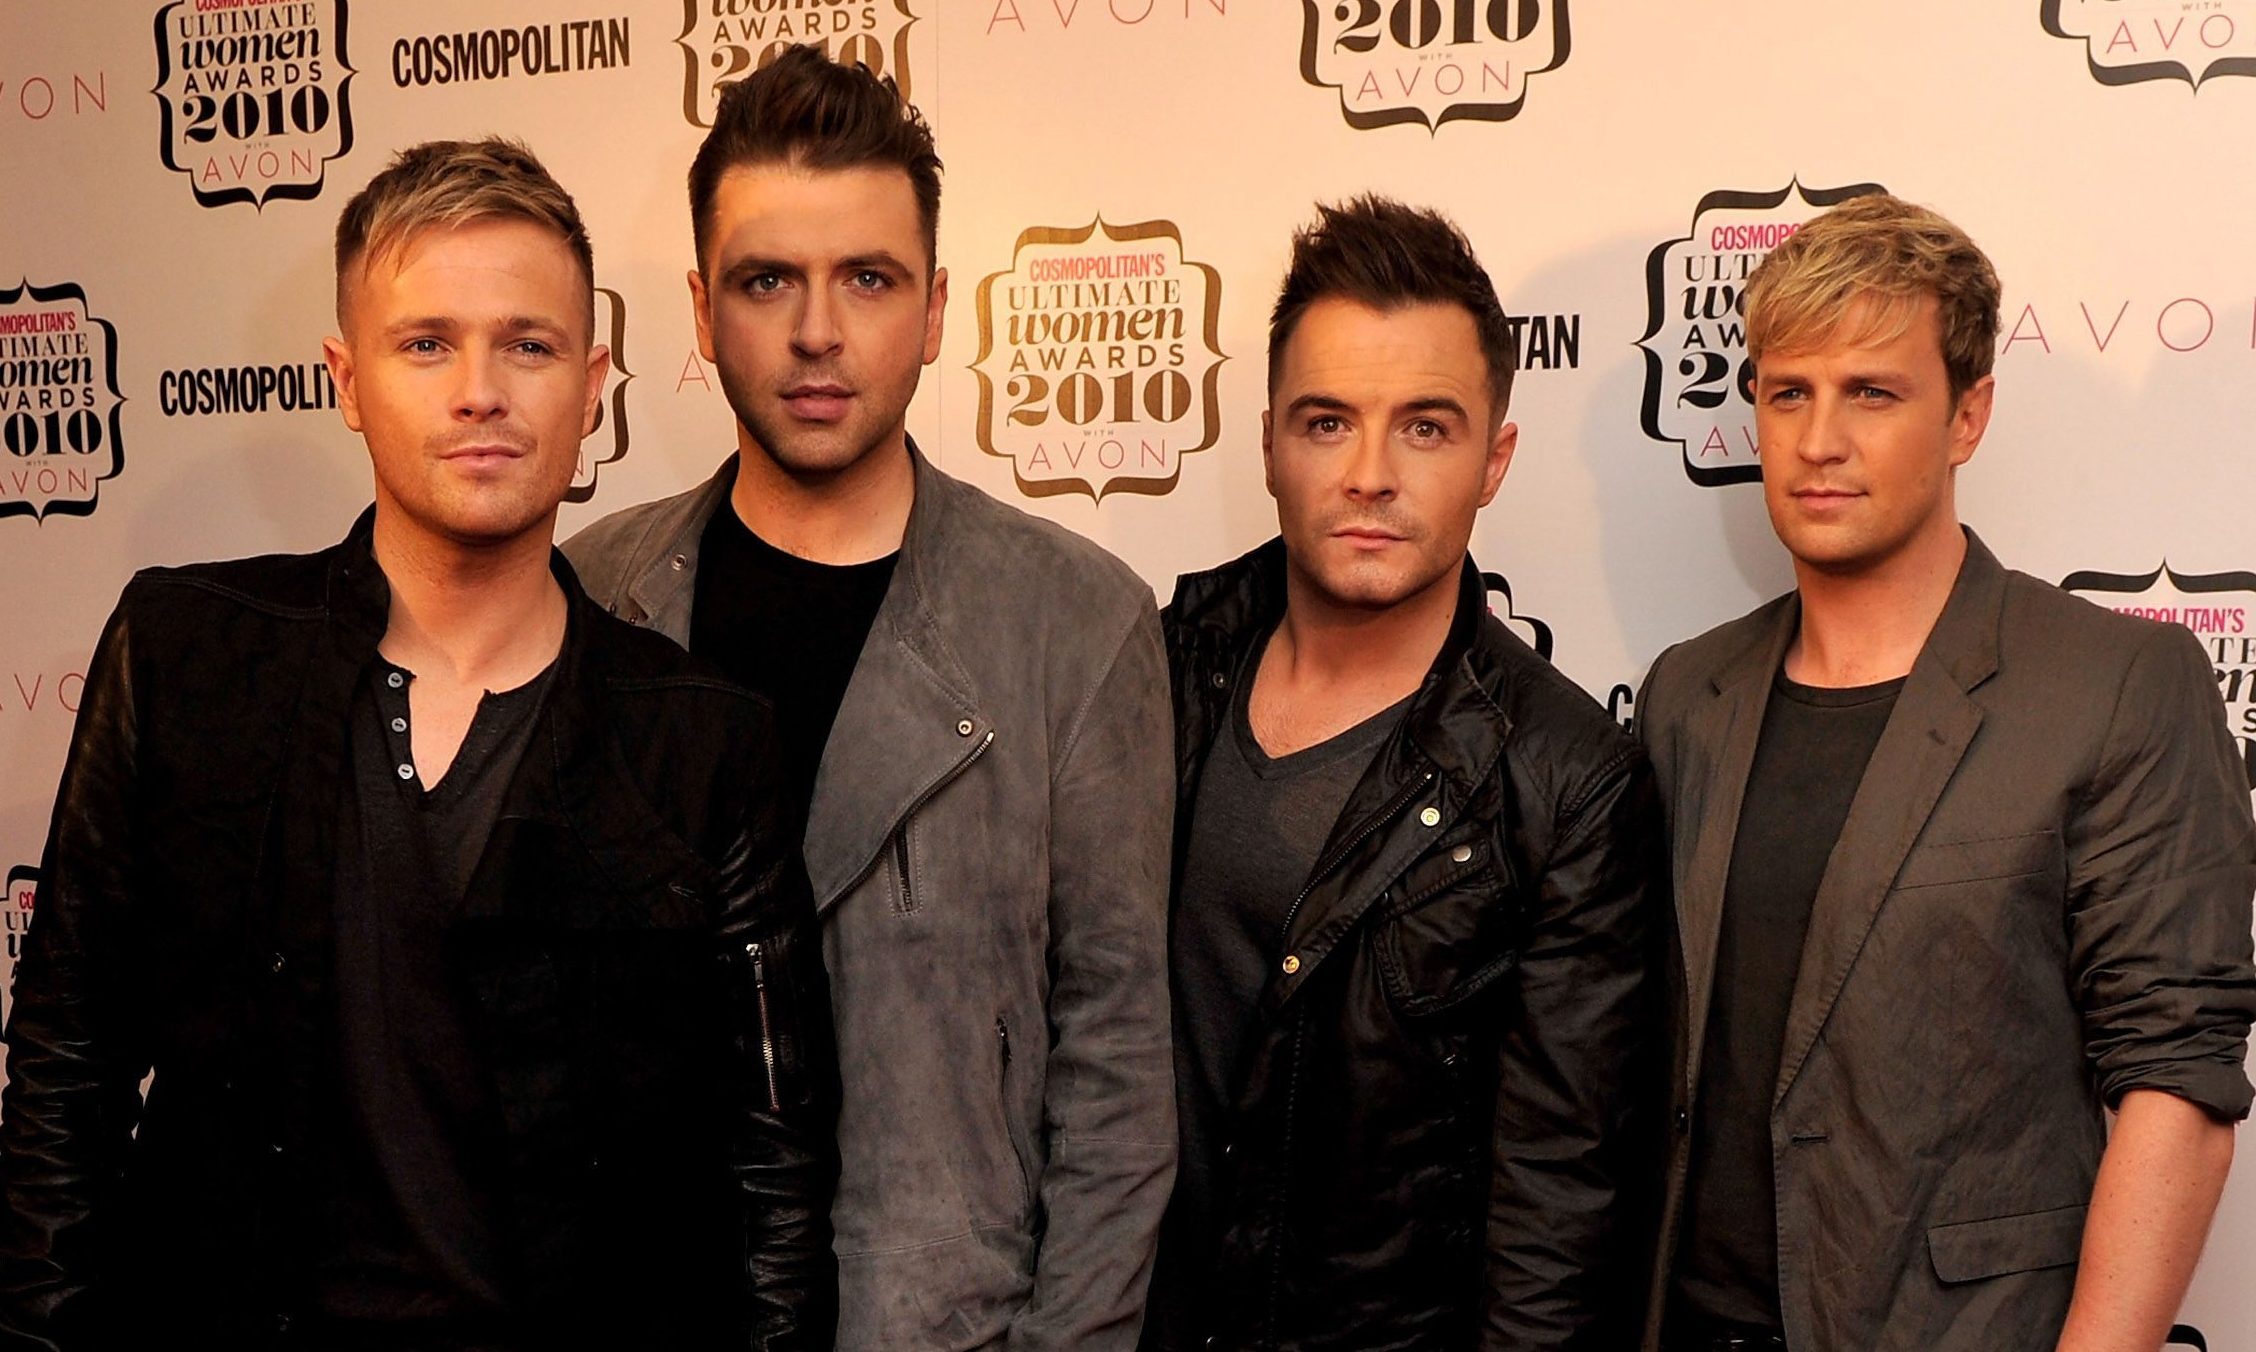 Westlife who are appearing in Glasgow